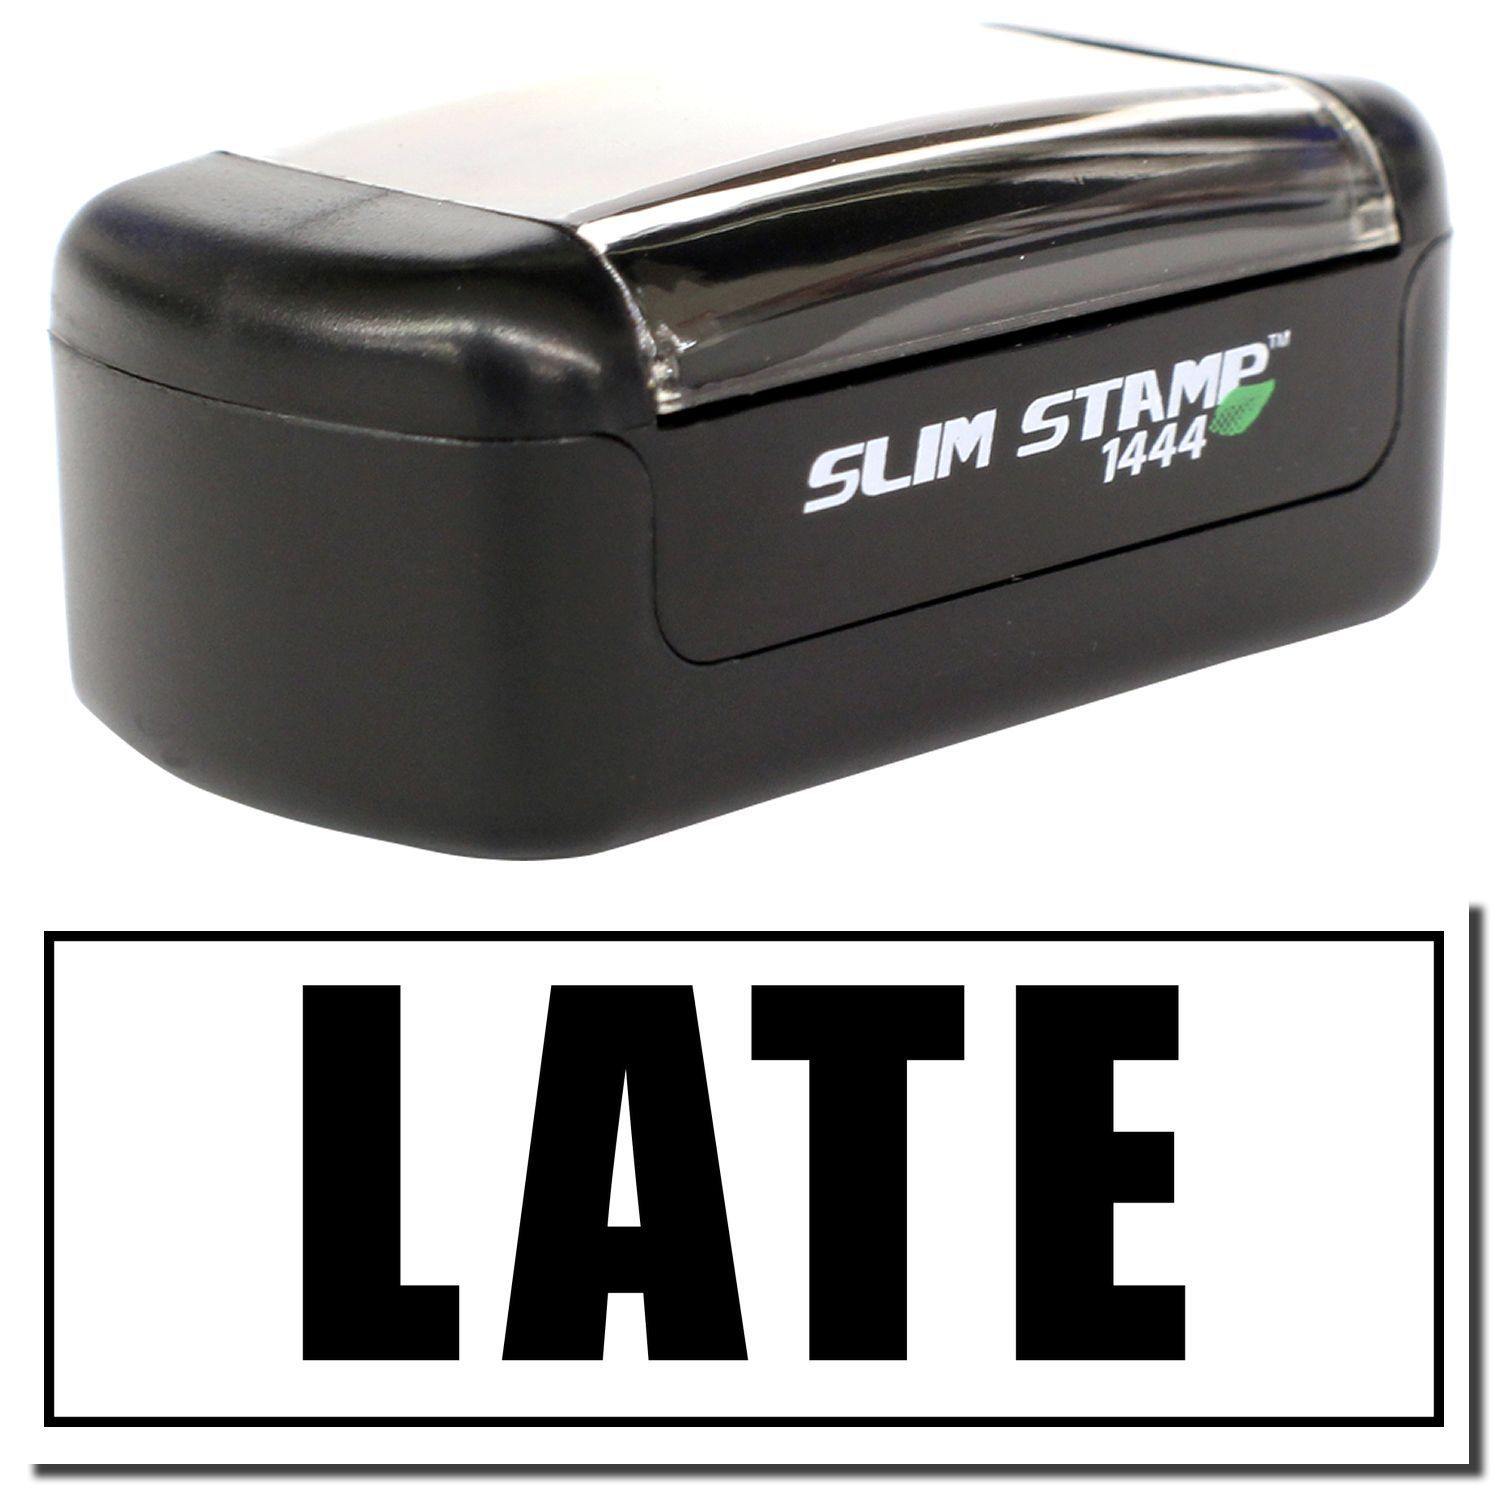 A stock office pre-inked stamp with a stamped image showing how the text "LATE" in bold font with an outline border is displayed after stamping.